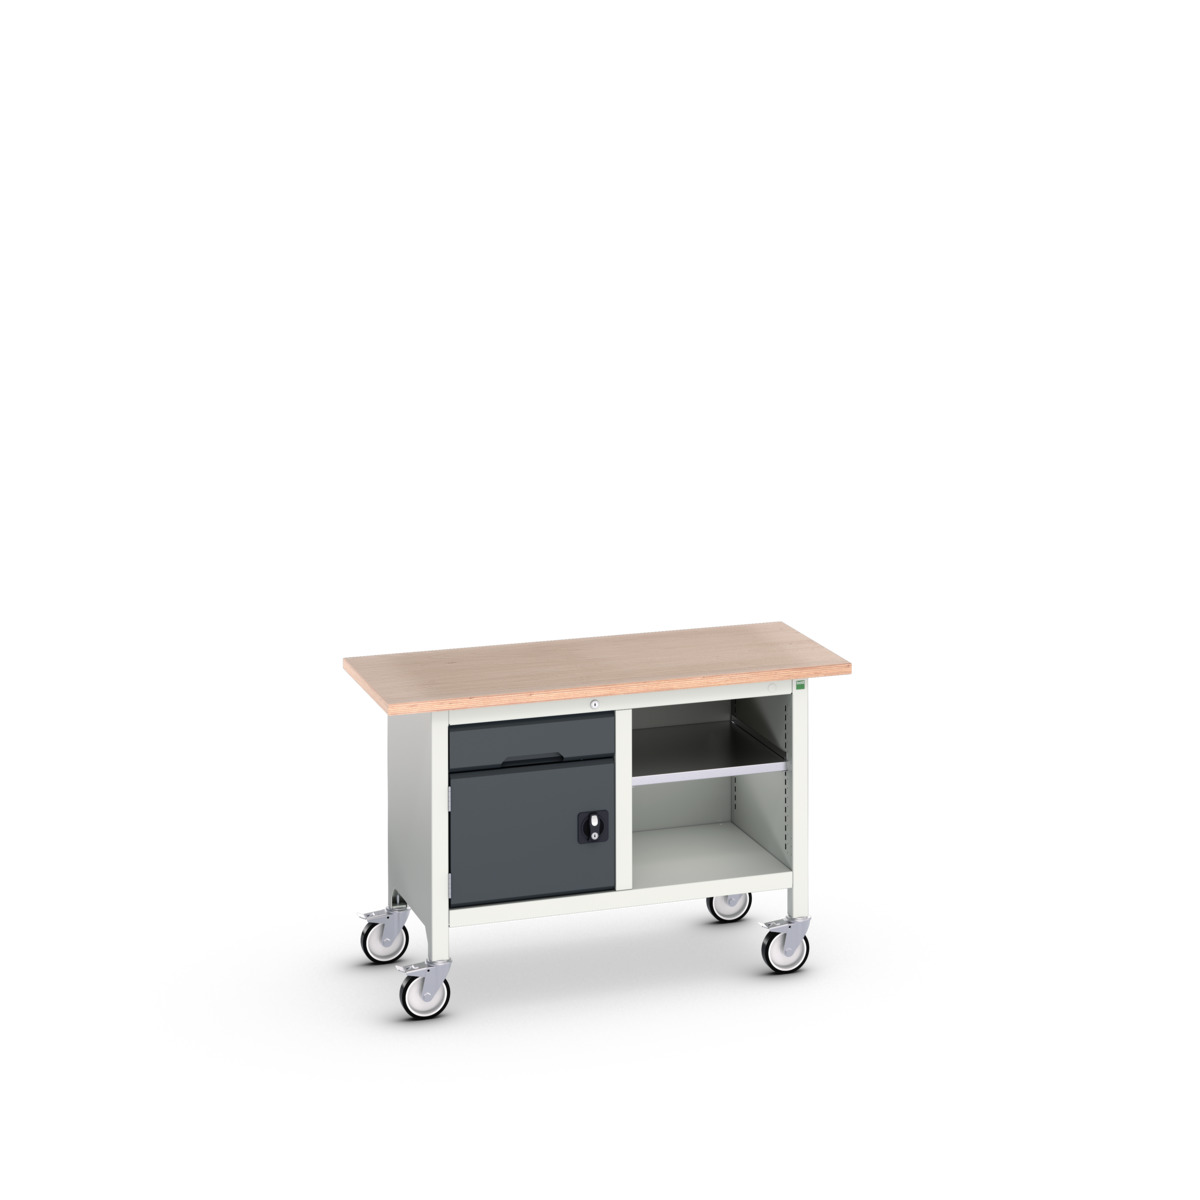 16923200. - verso mobile storage bench (mpx)